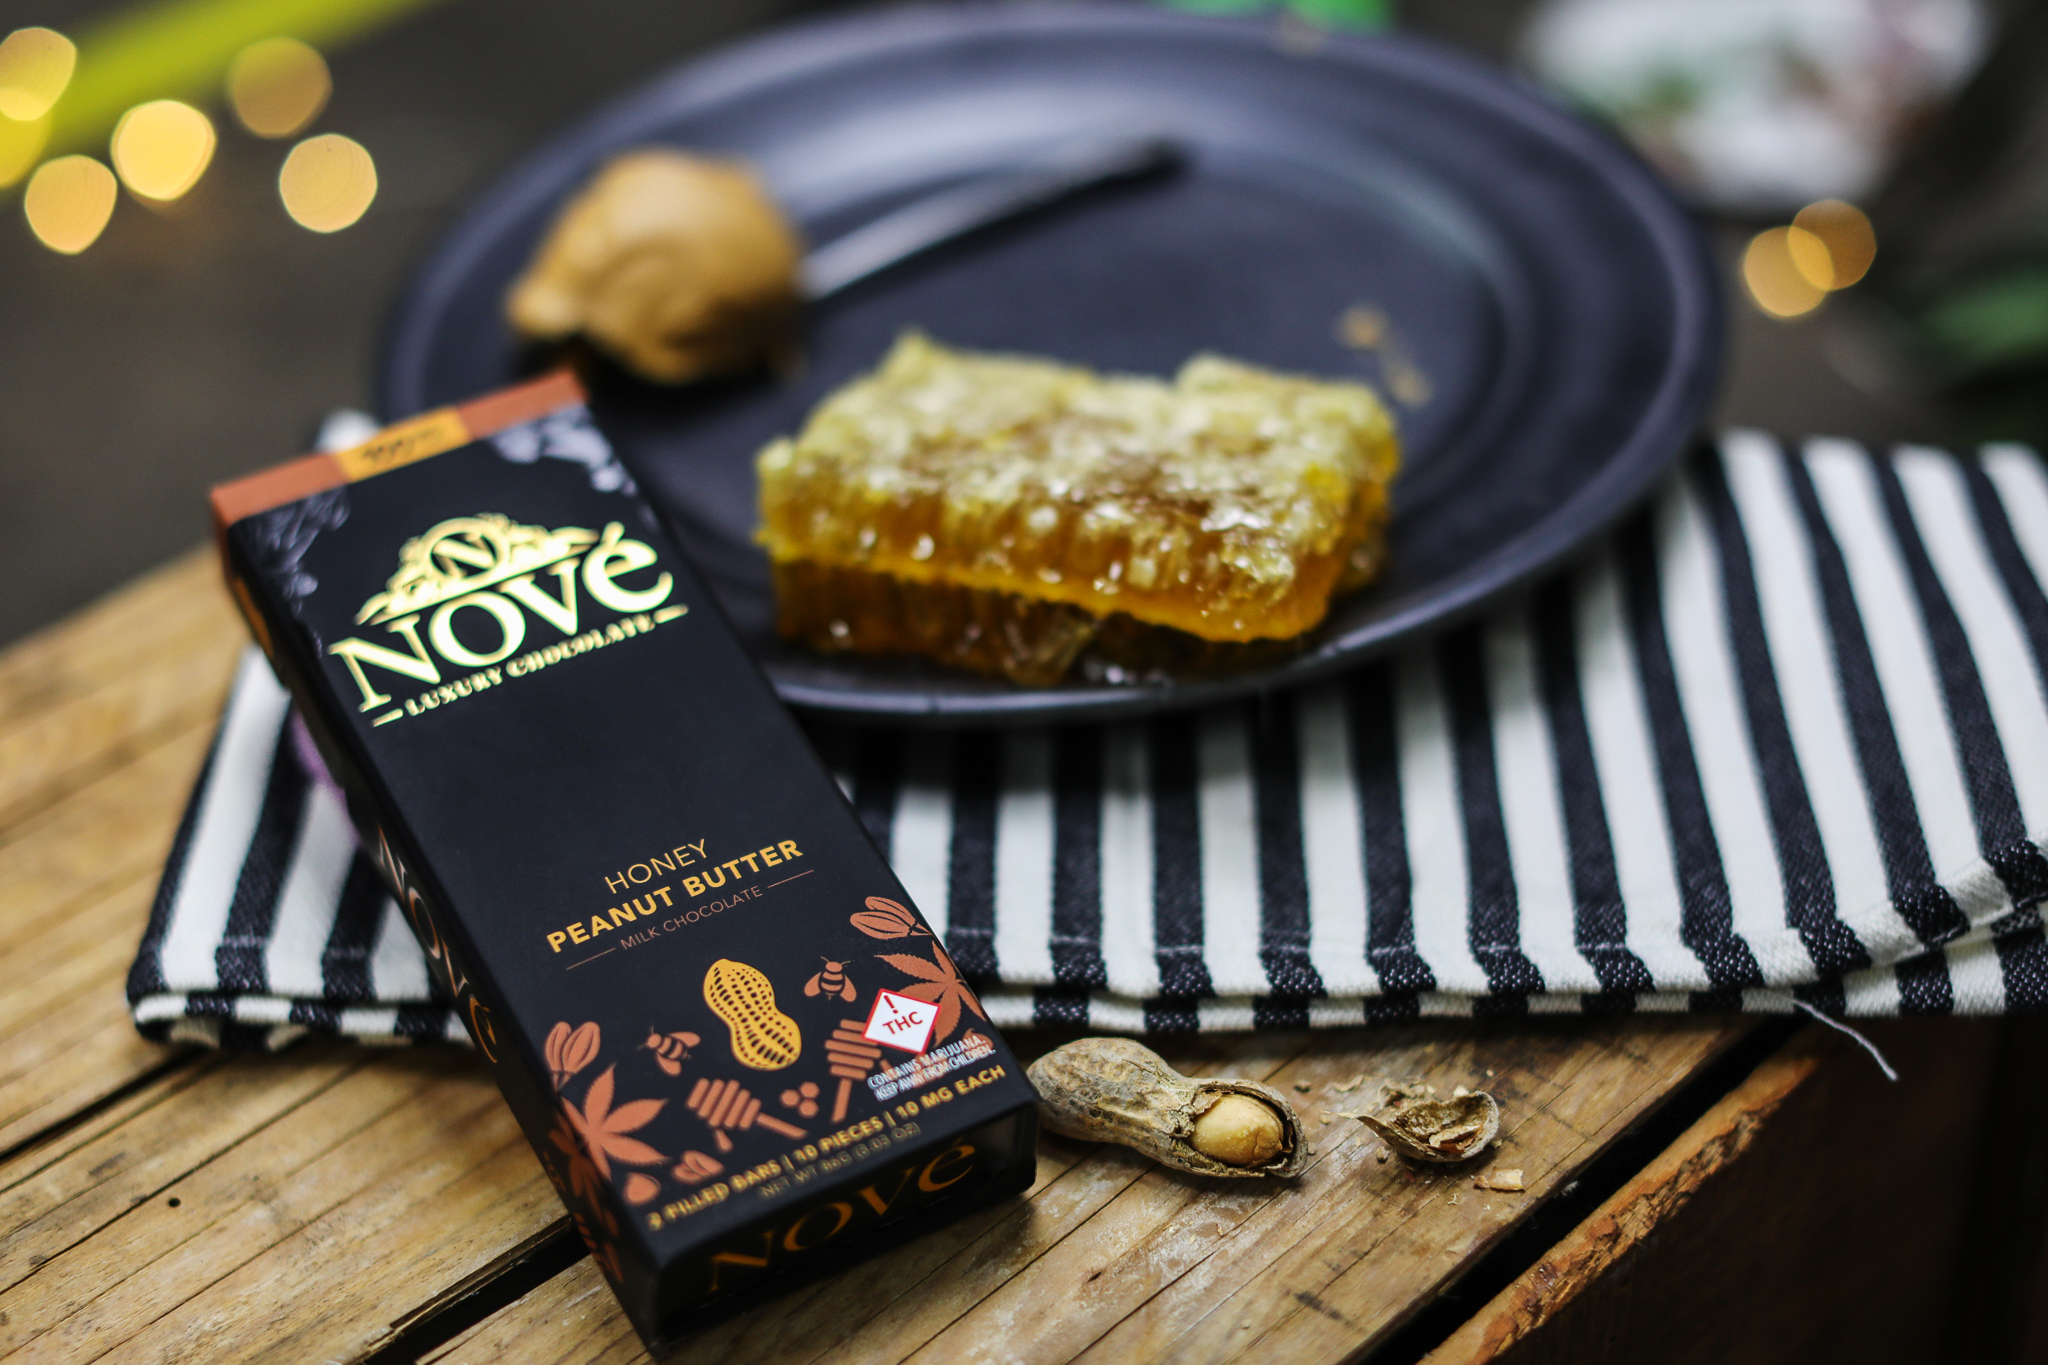 Nove Honey Peanut Butter cannabis chocolate resting next to fresh honeycomb and peanuts.